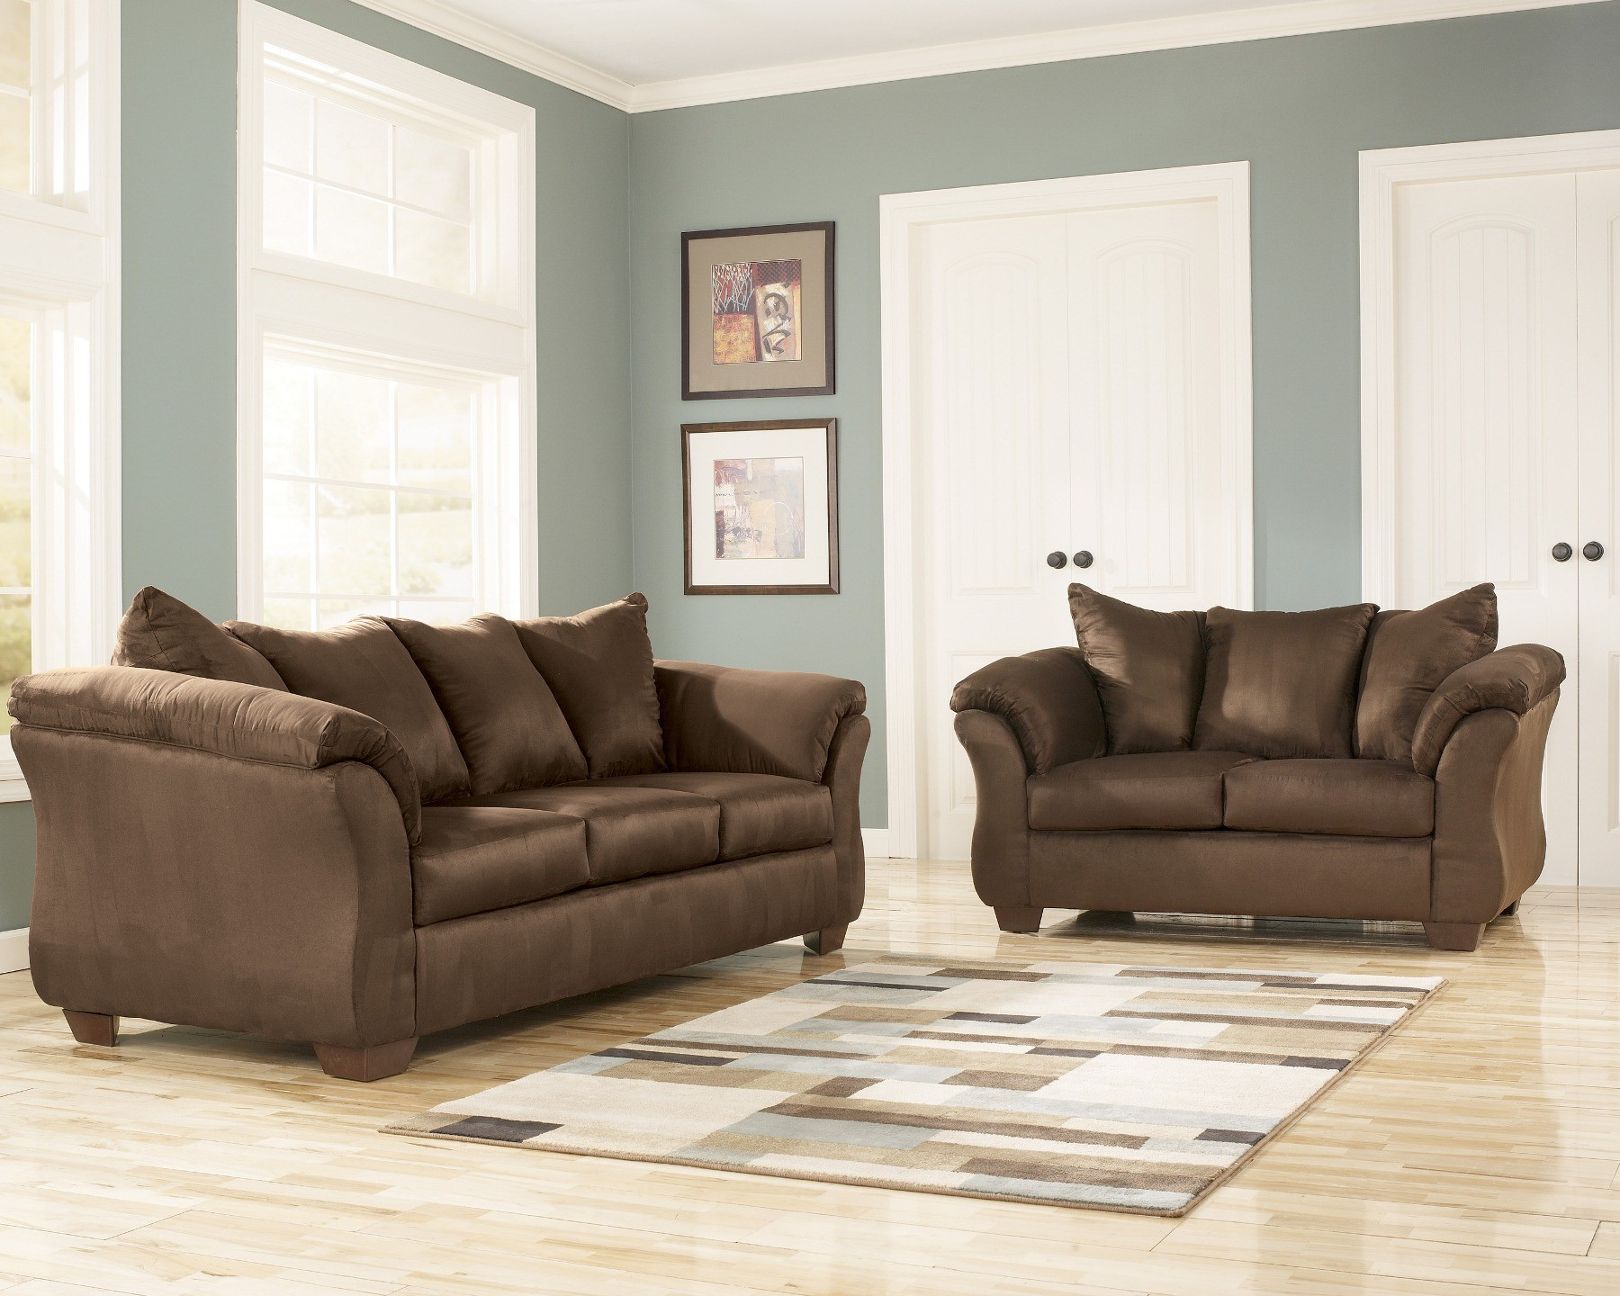 Furniture In Brooklyn At Gogofurniture and Ashton Living Room Furniture Sets & Pieces